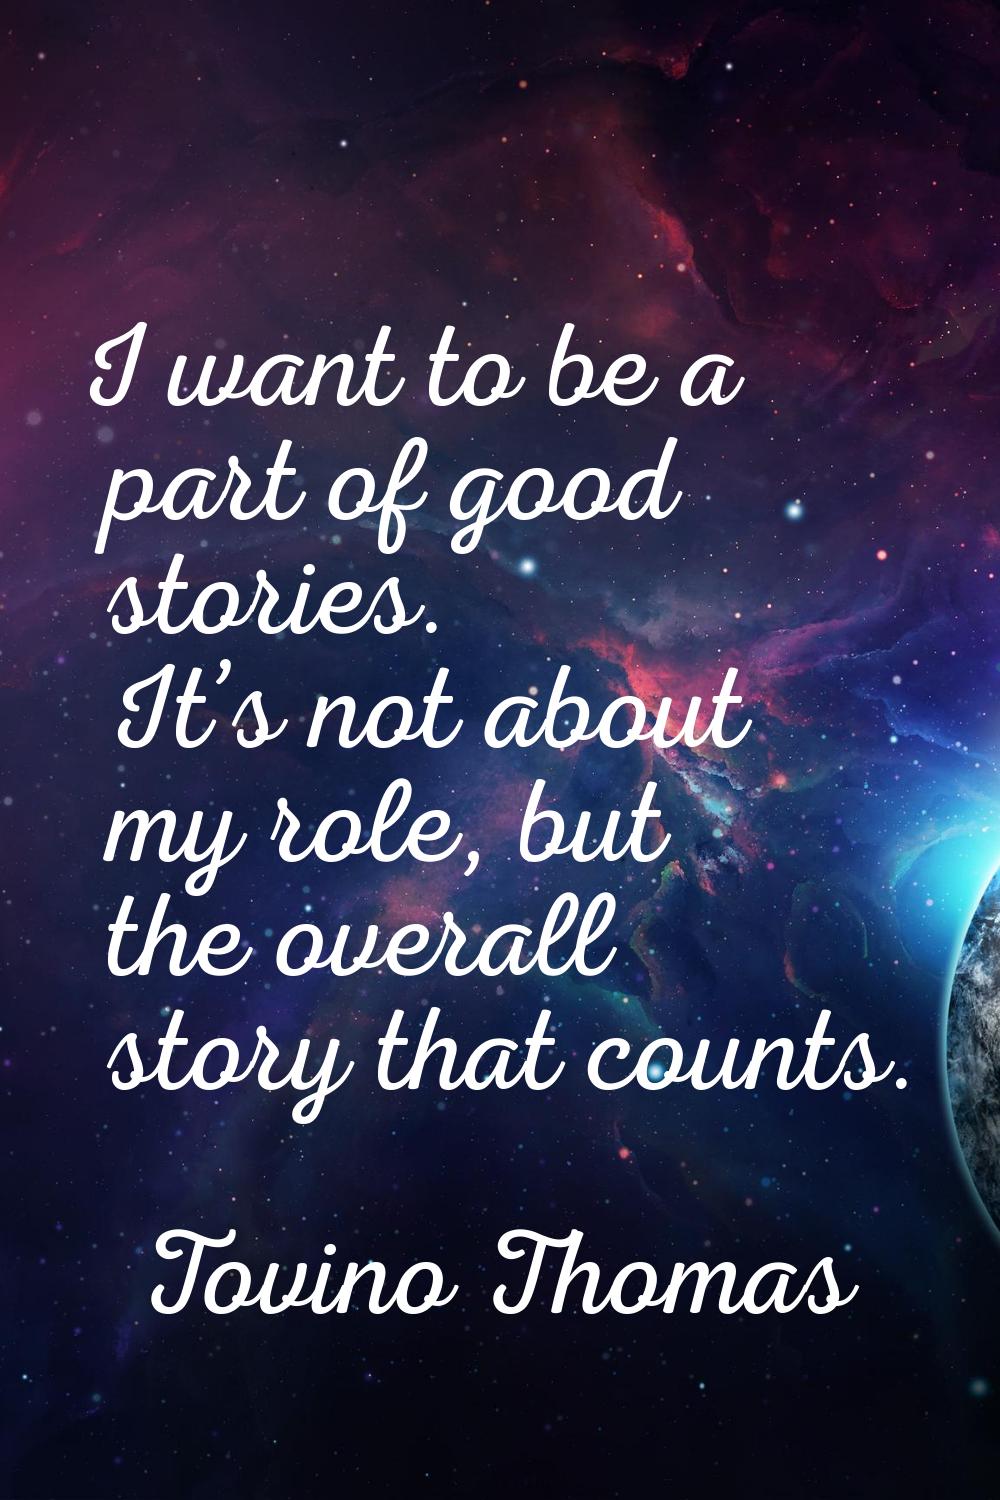 I want to be a part of good stories. It’s not about my role, but the overall story that counts.